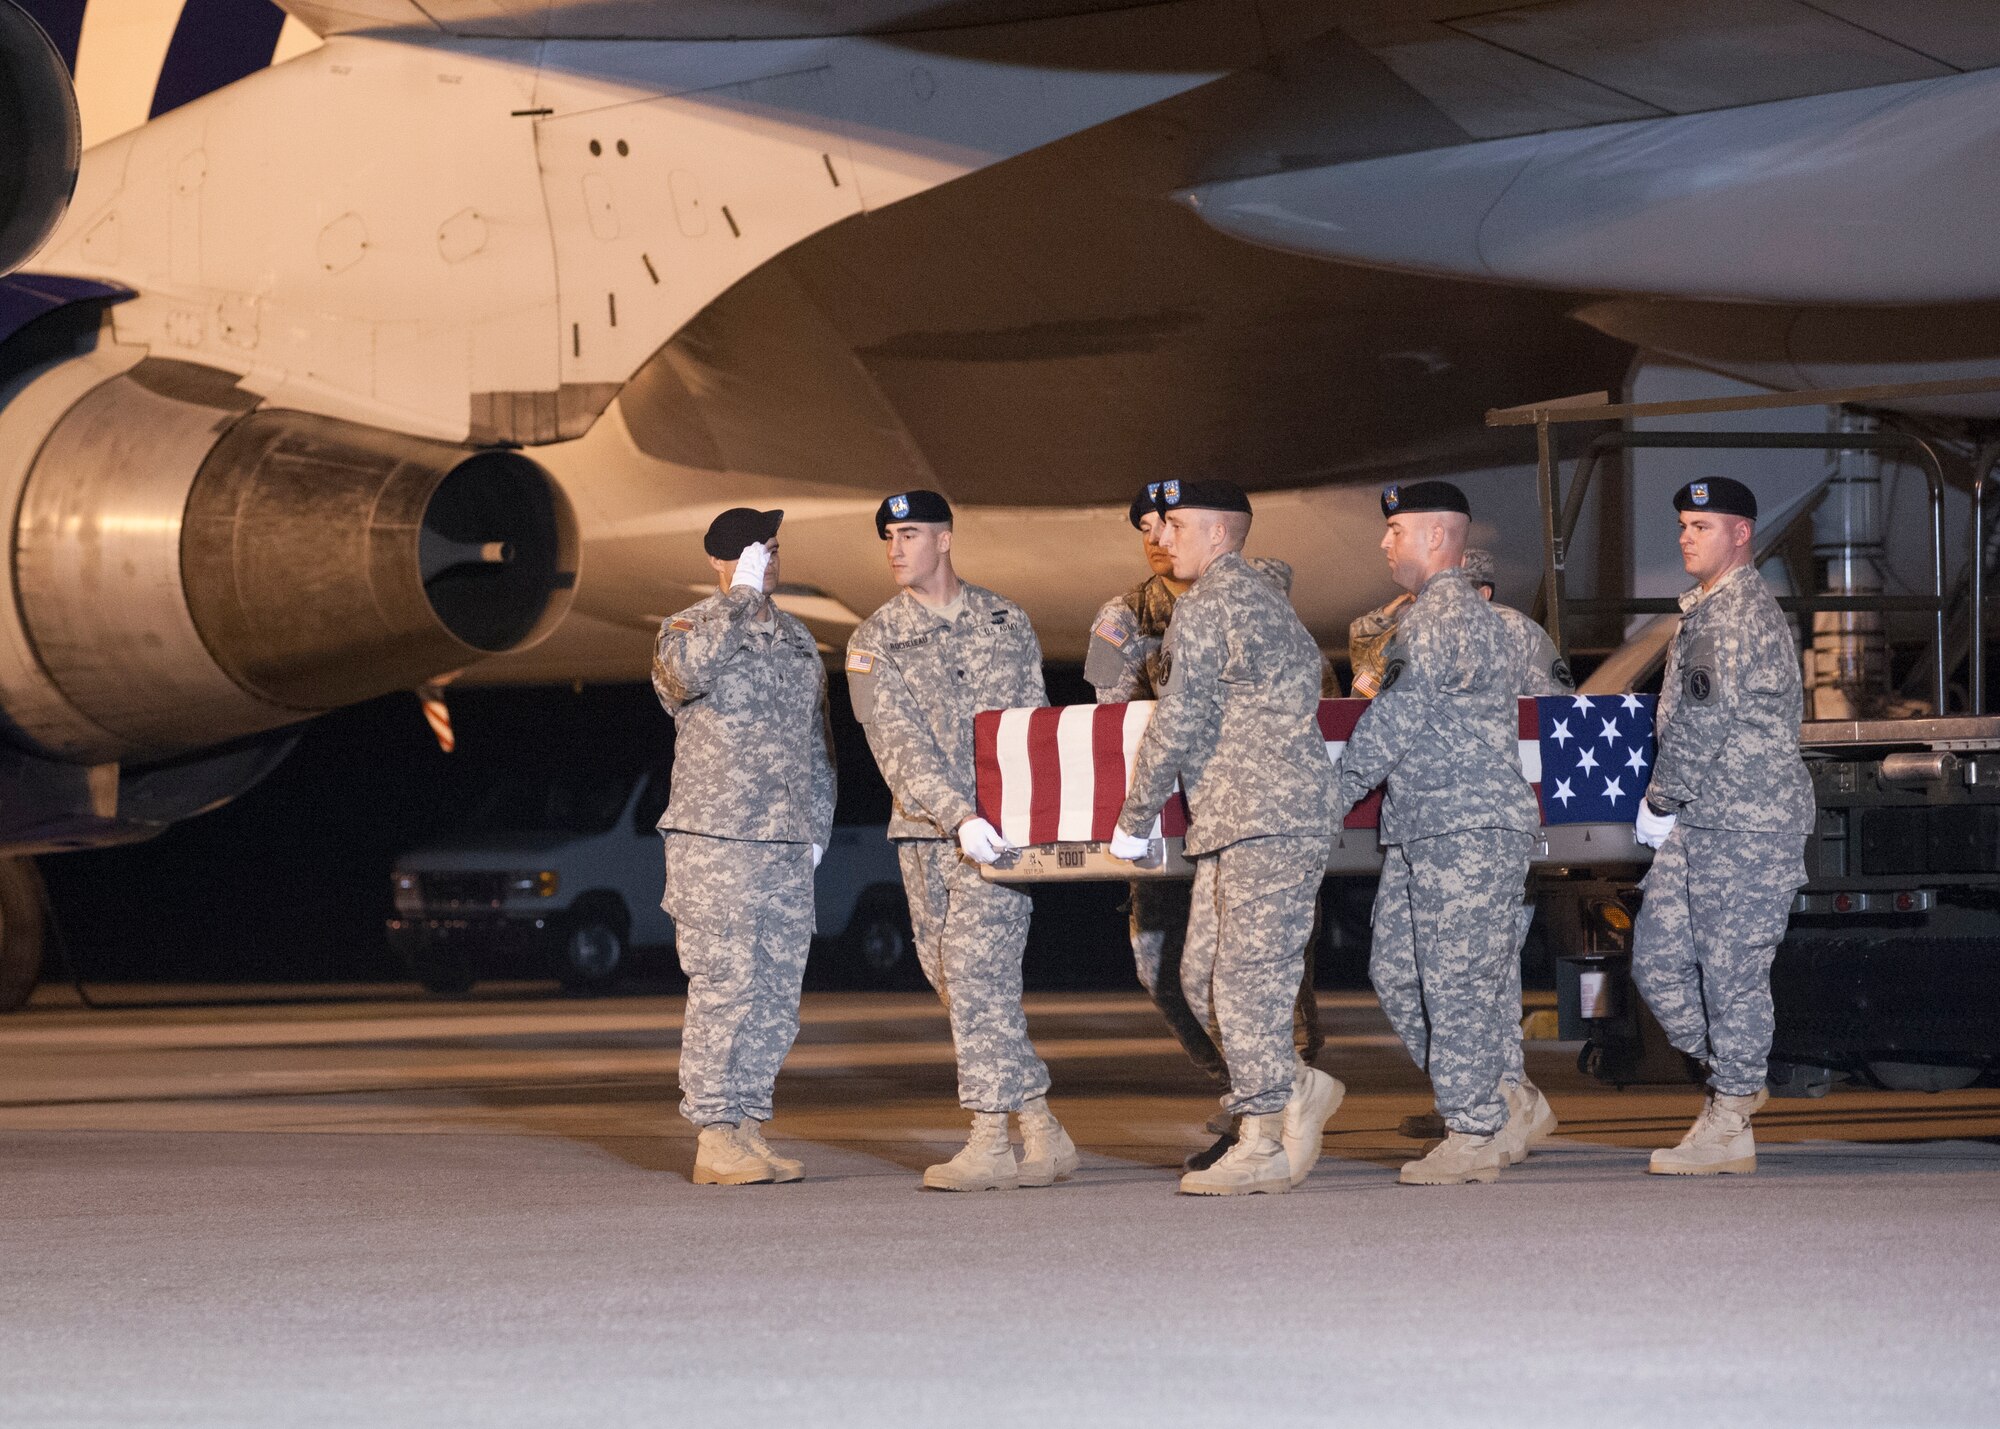 A U.S. Army carry team transfers the remains of Sgt. Christopher W. Mulalley of Eureka, Calif., at Dover Air Force Base, Del. Mulalley was assigned to Troop B, 1st Squadron, 3rd Cavalry at Fort Hood, Texas. (U.S. Air Force photo/Senior Airman Jared Duhon)
